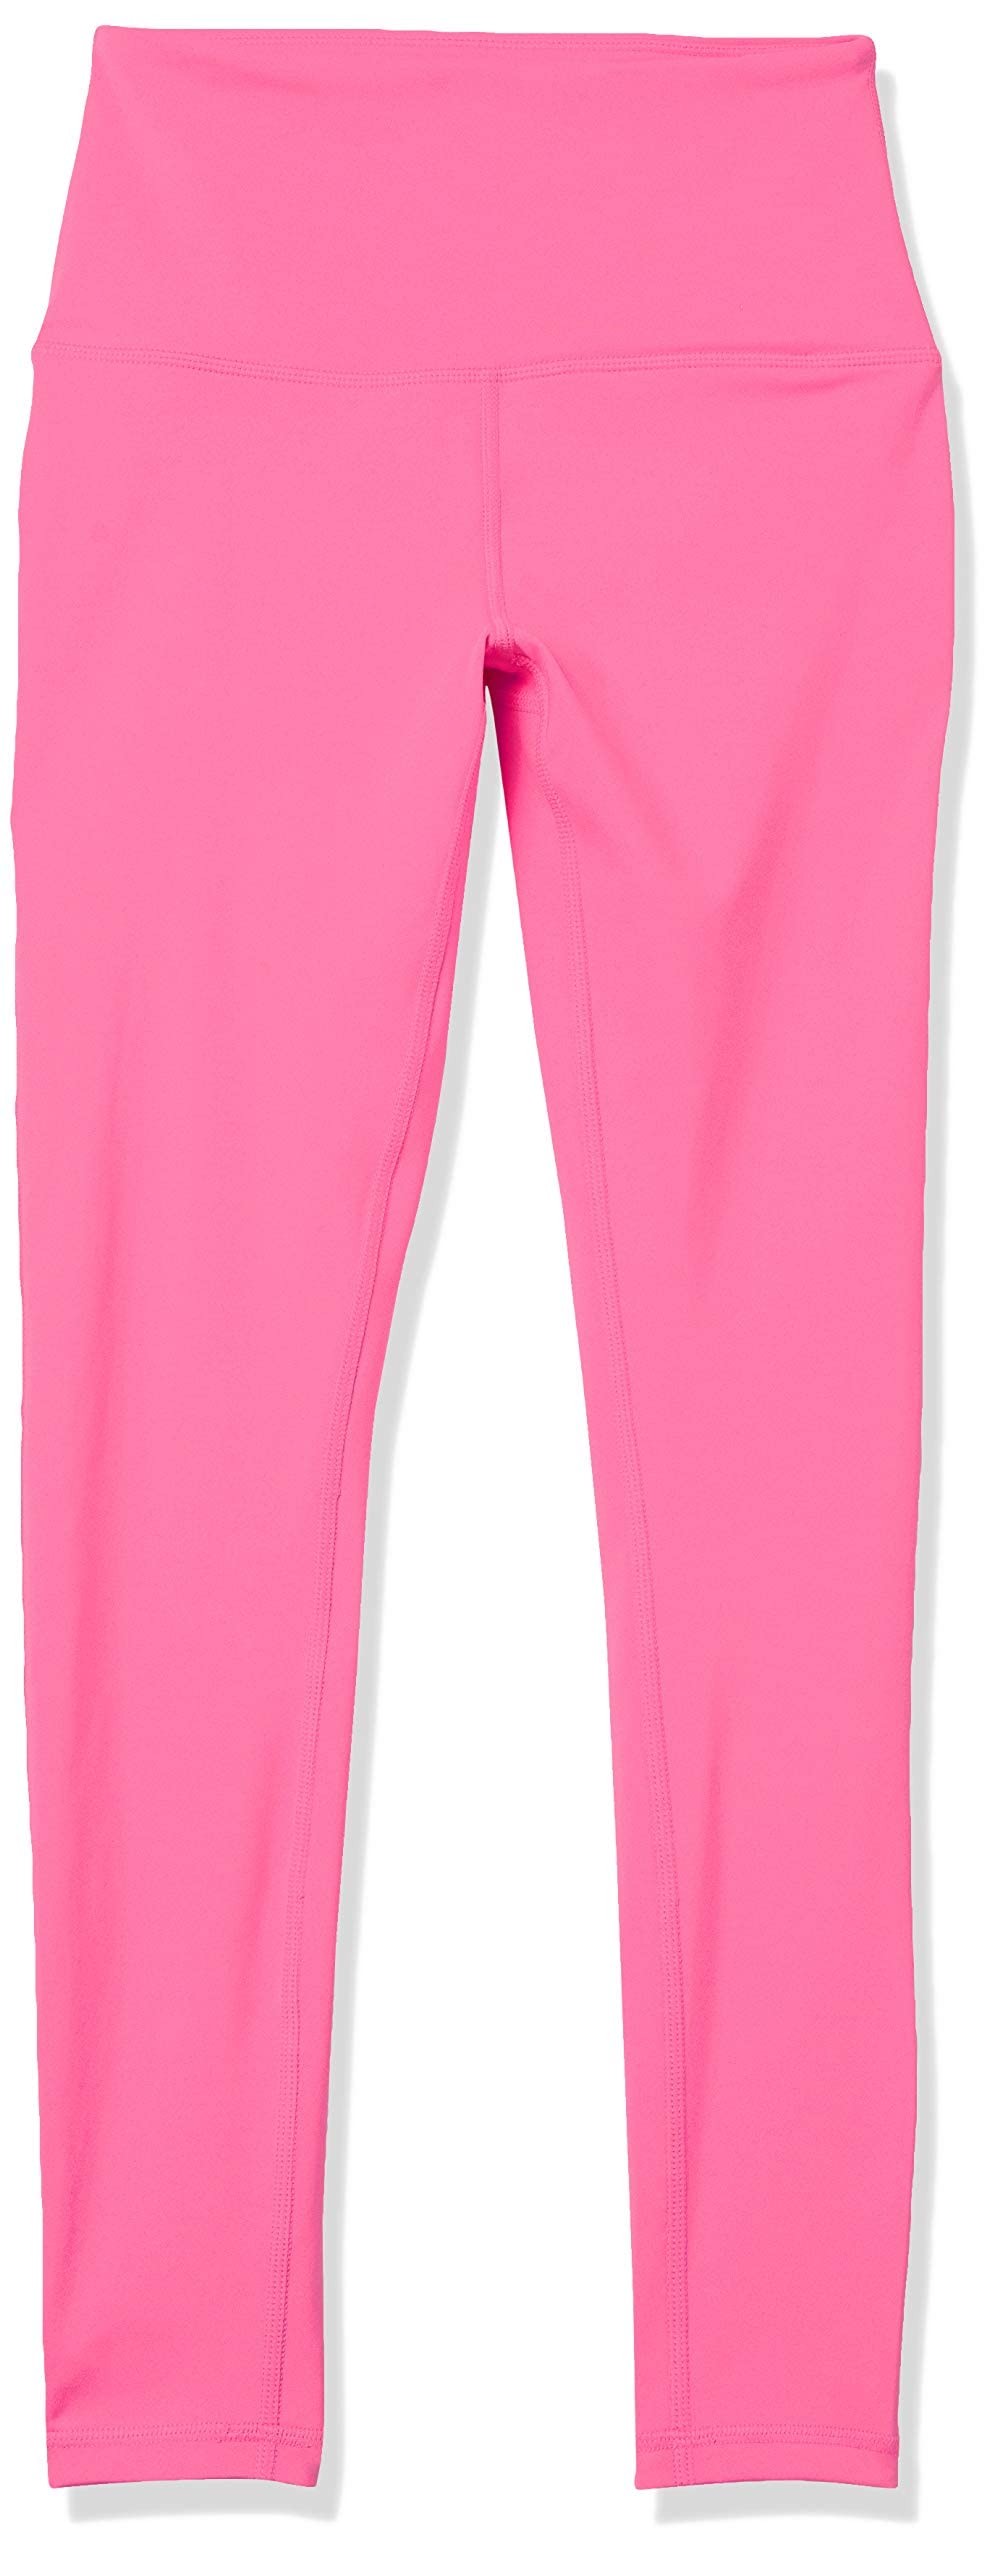 Amazon Essentials Women's Active Sculpt High-Rise Full-Length Legging (Available in Plus Size)